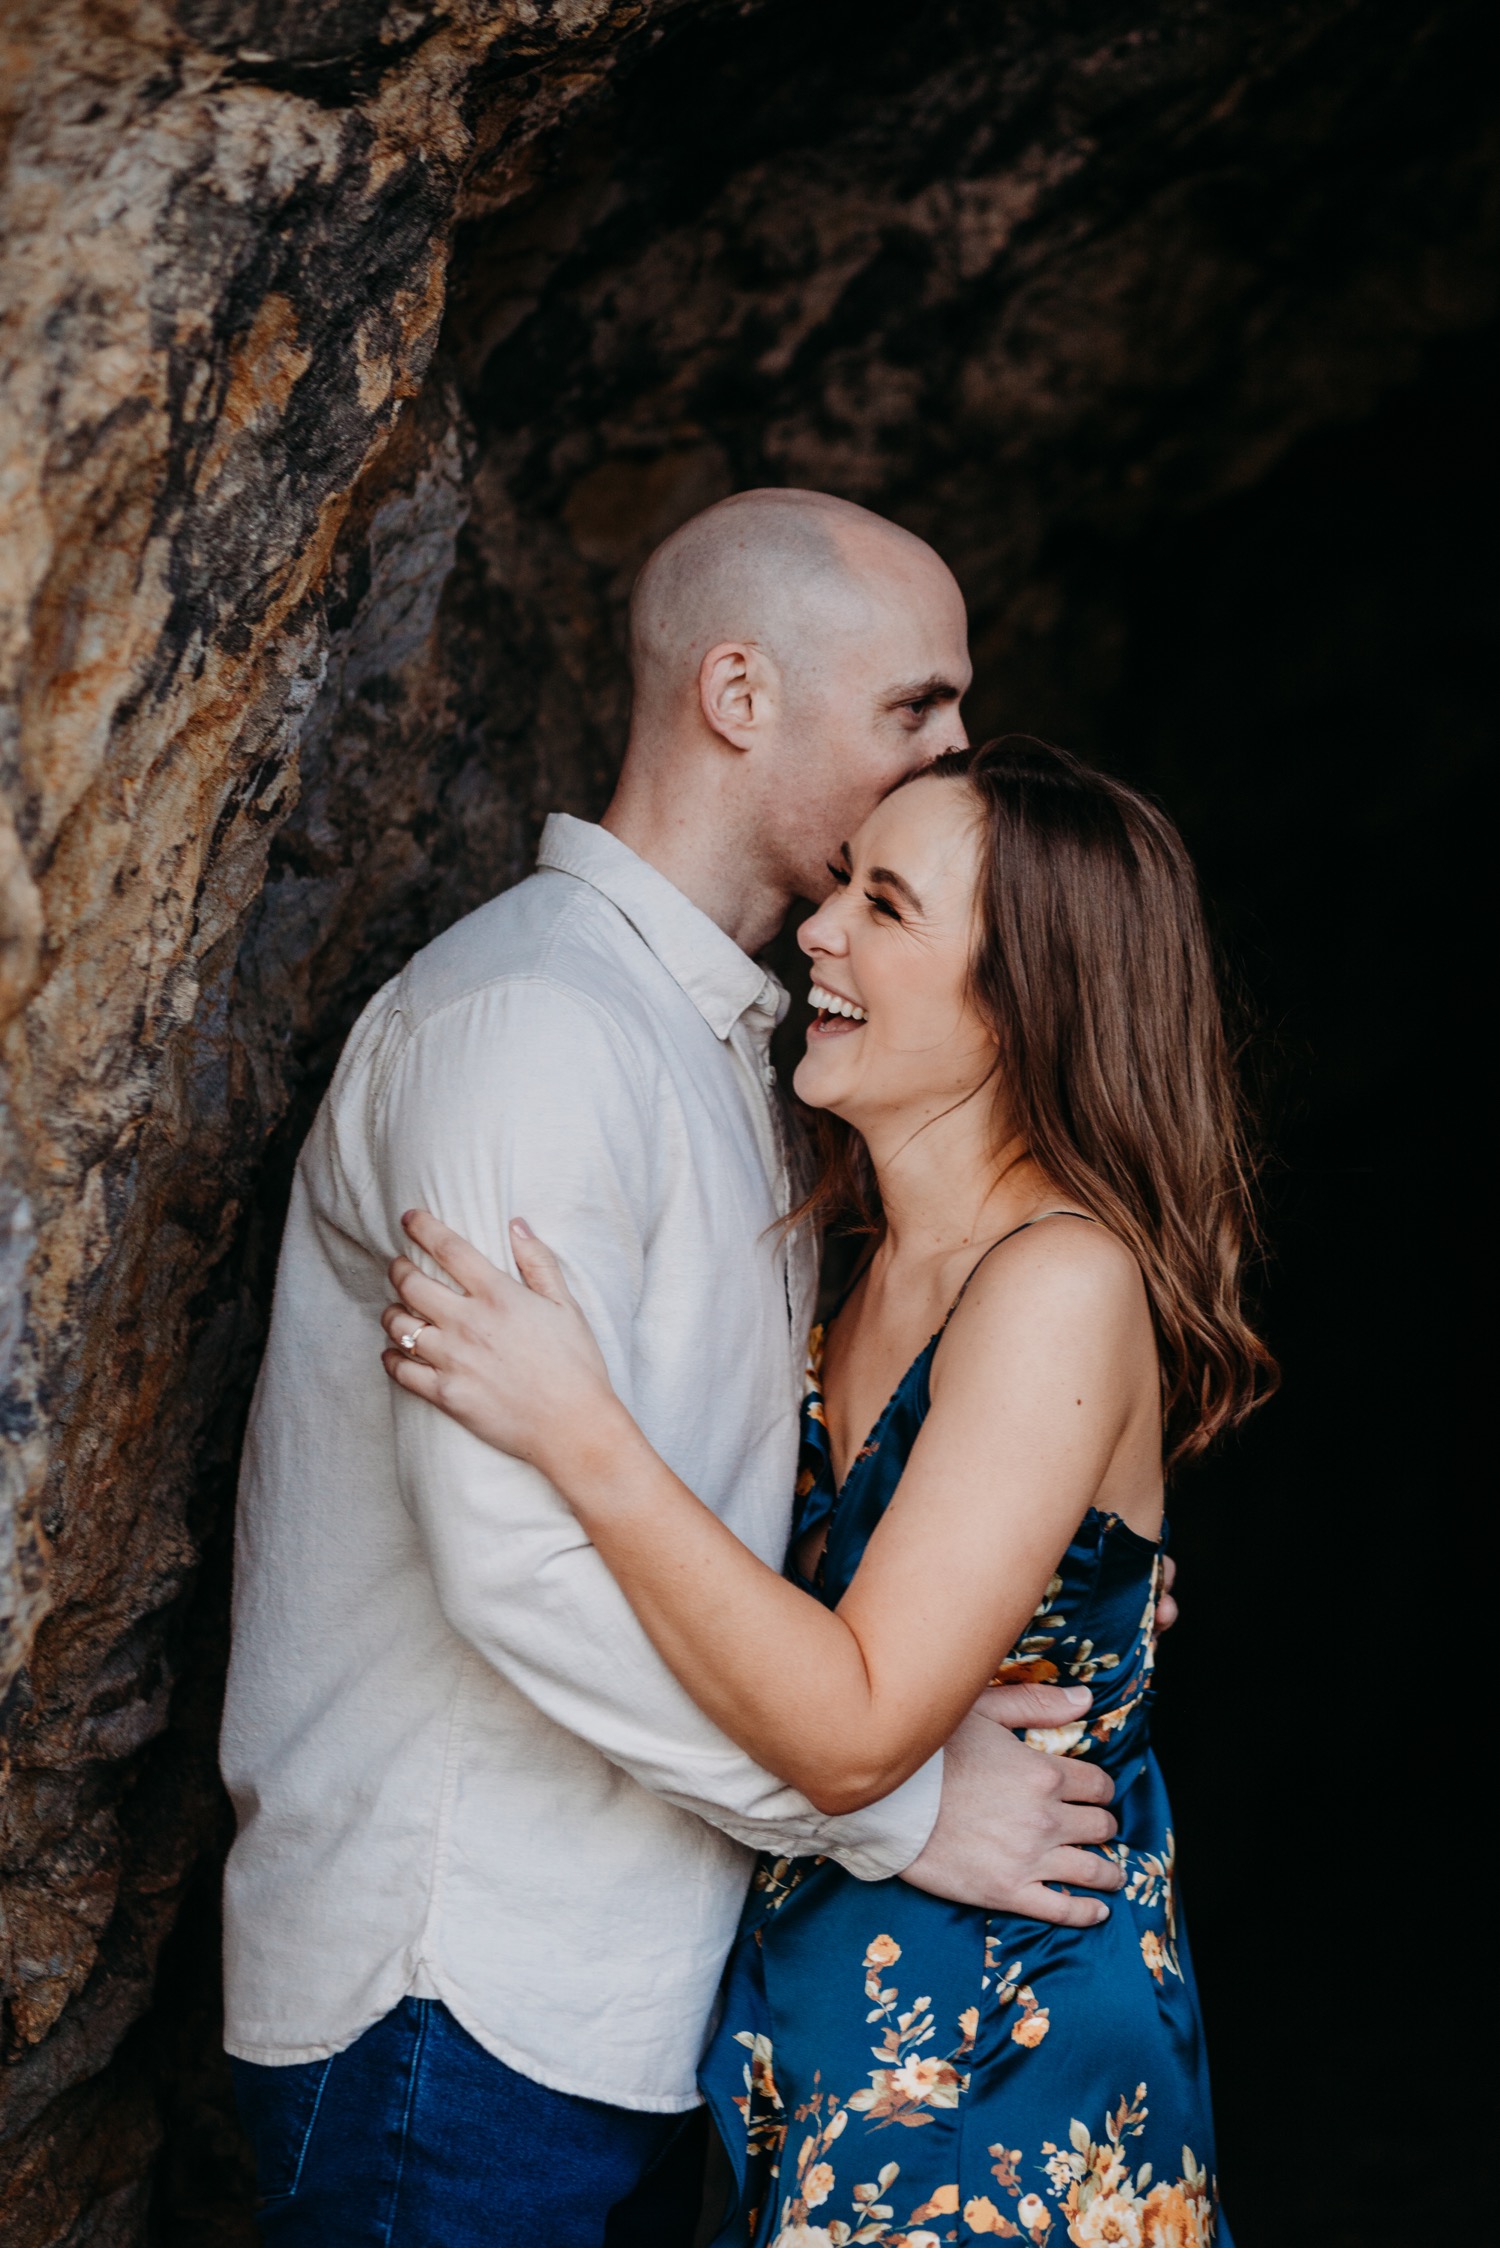 Man whispers in his fiance's ear during their Sutro Baths engagement photos.